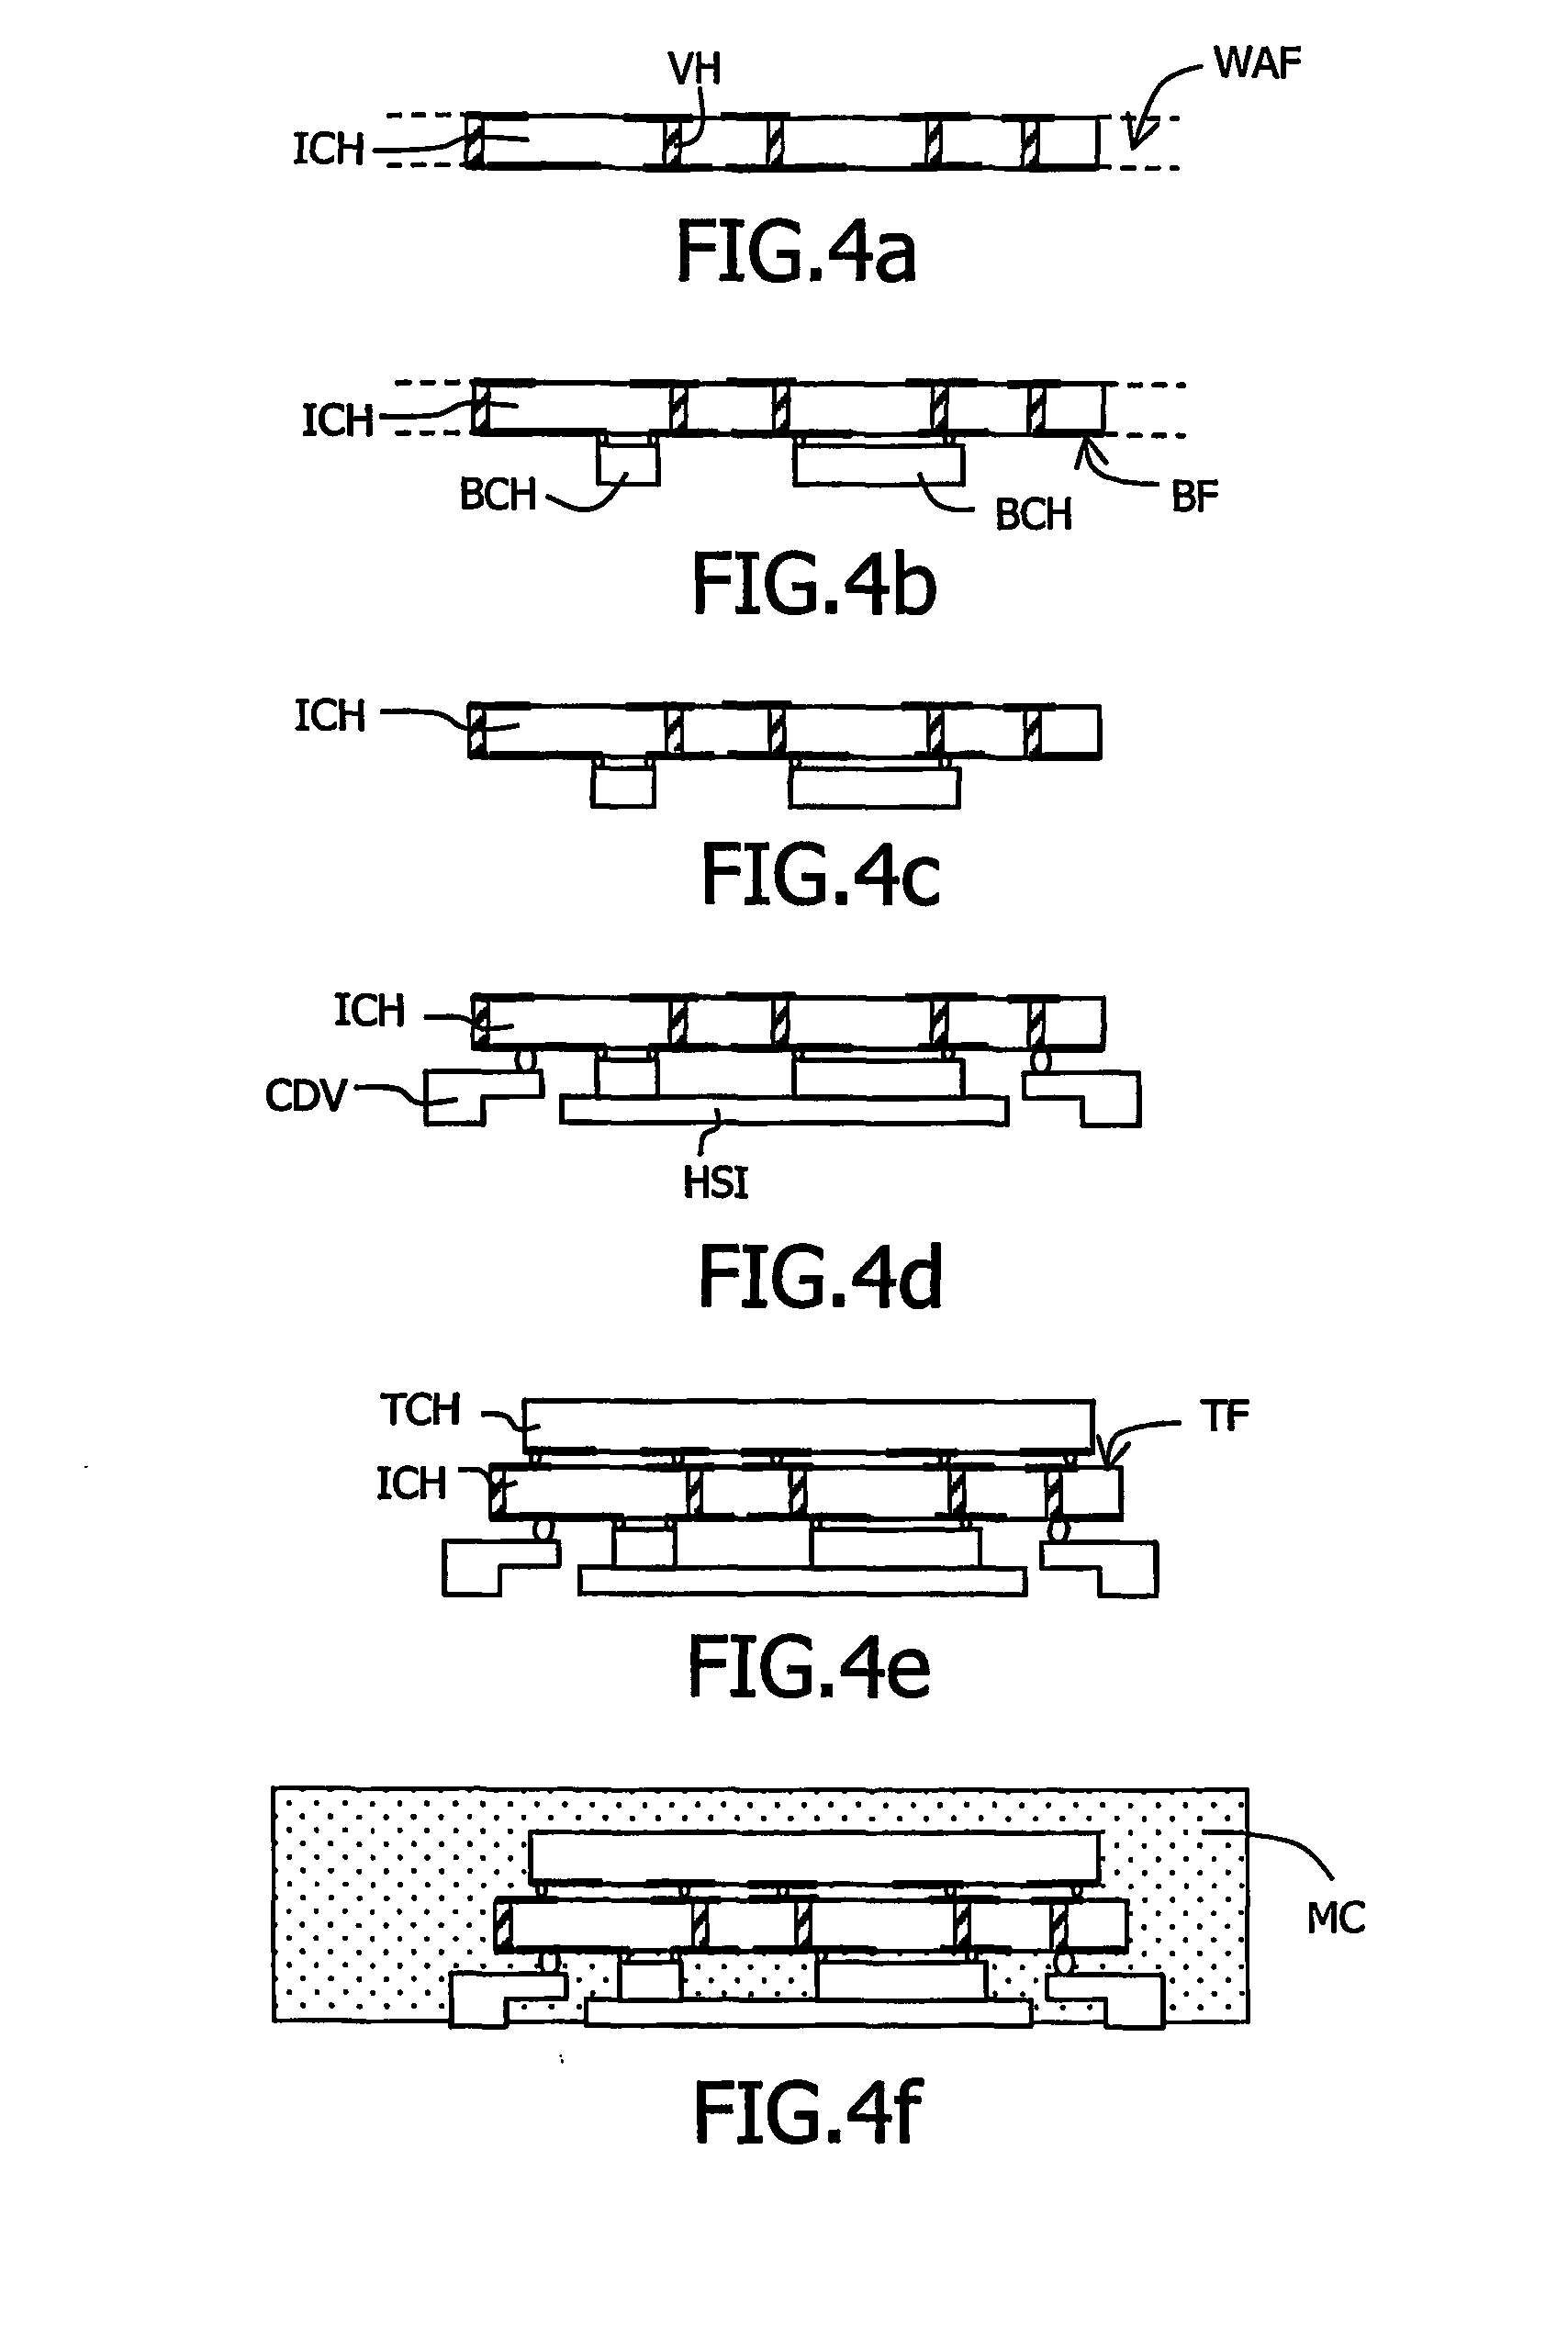 Optimized multi-apparation assembly